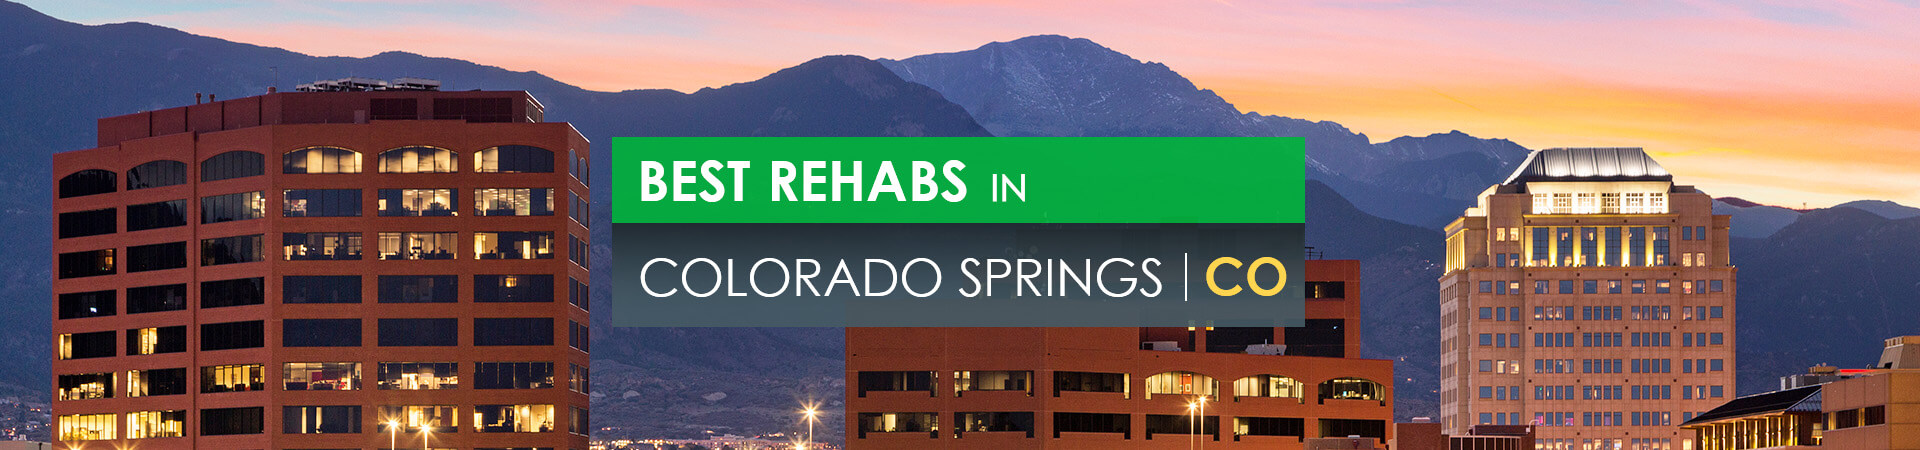 If you or someone you love is searching for help with substance abuse in Co...